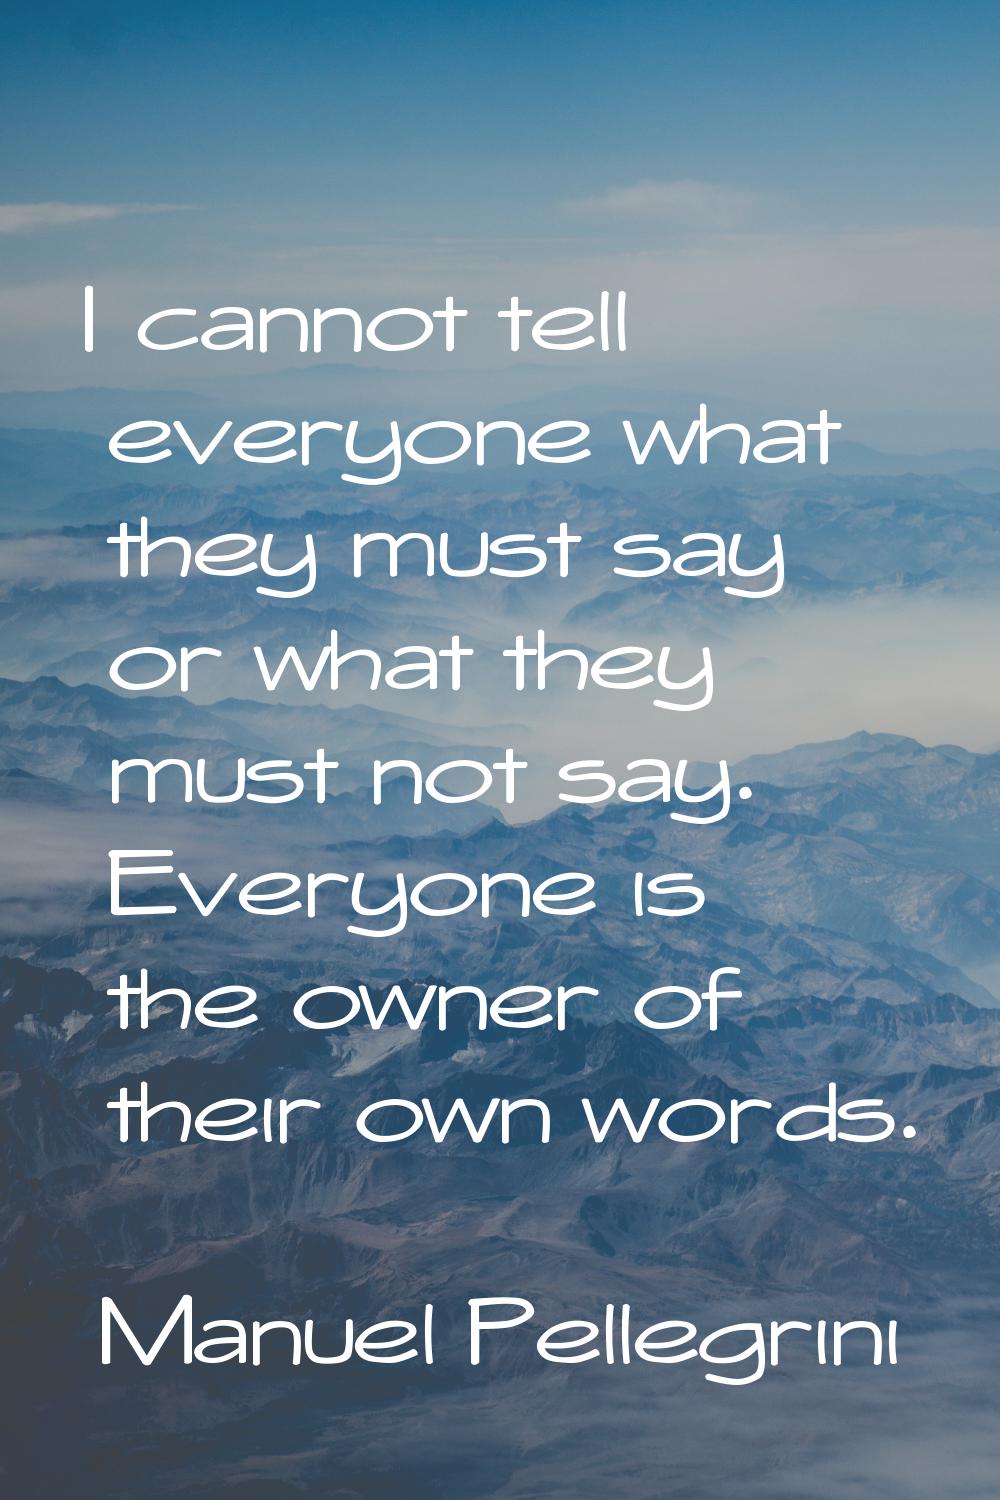 I cannot tell everyone what they must say or what they must not say. Everyone is the owner of their